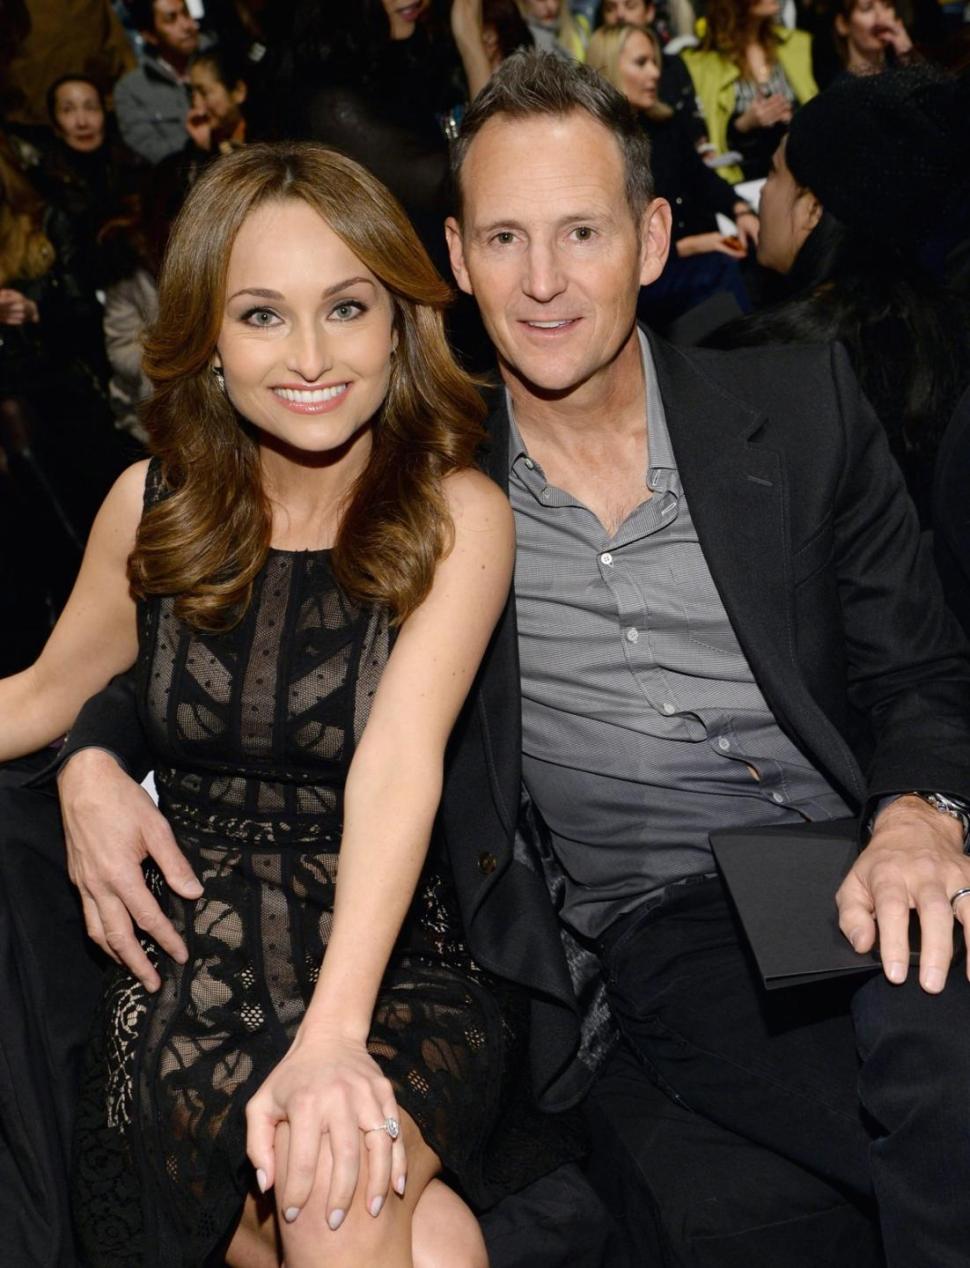 Celebrity chef Giada De Laurentiis and designer Todd Thompson during Mercedes-Benz Fashion Week in Lincoln Center on February 6 in New York City.